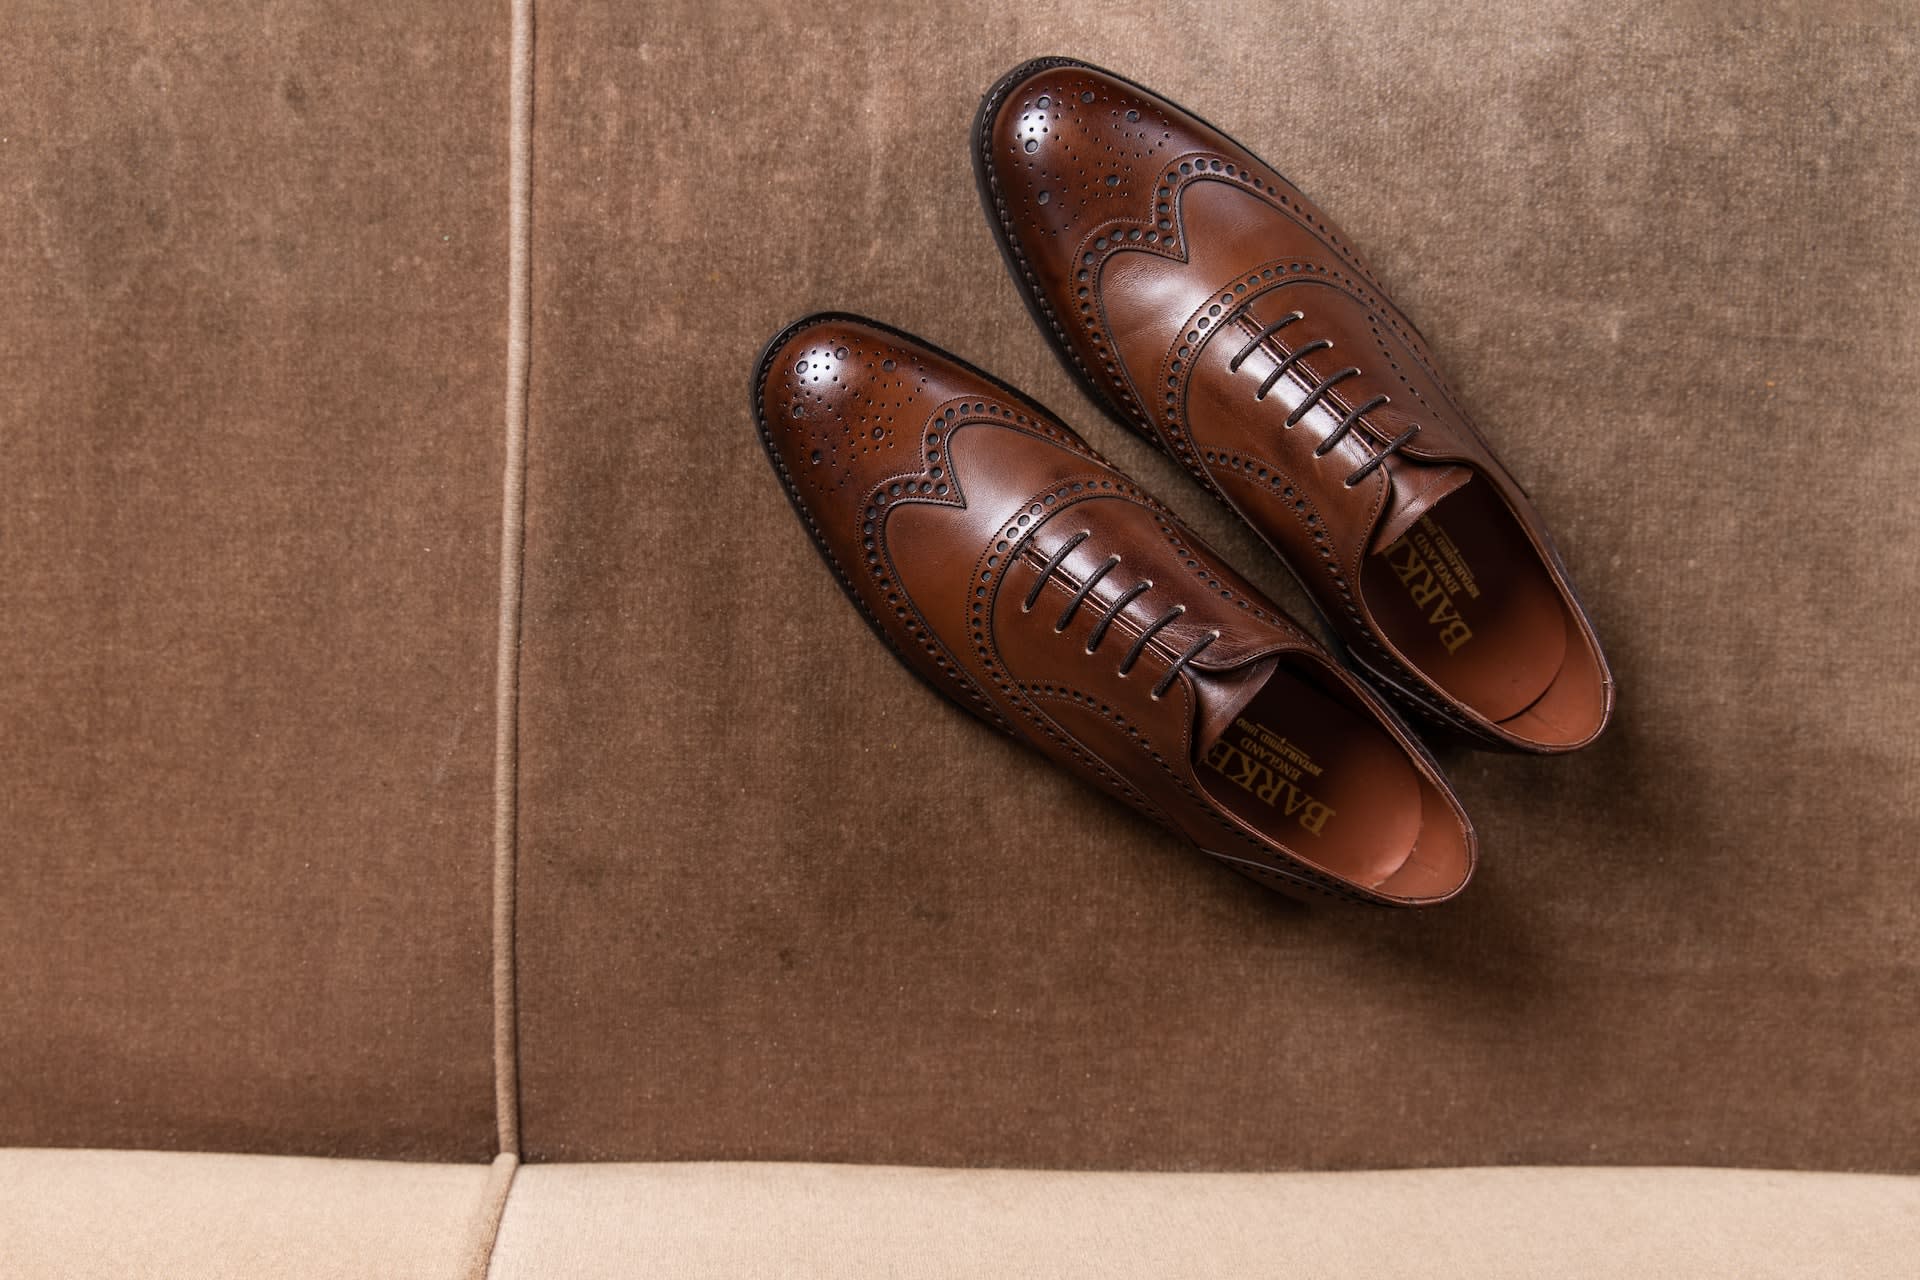 Classic vintage brown leather brogues